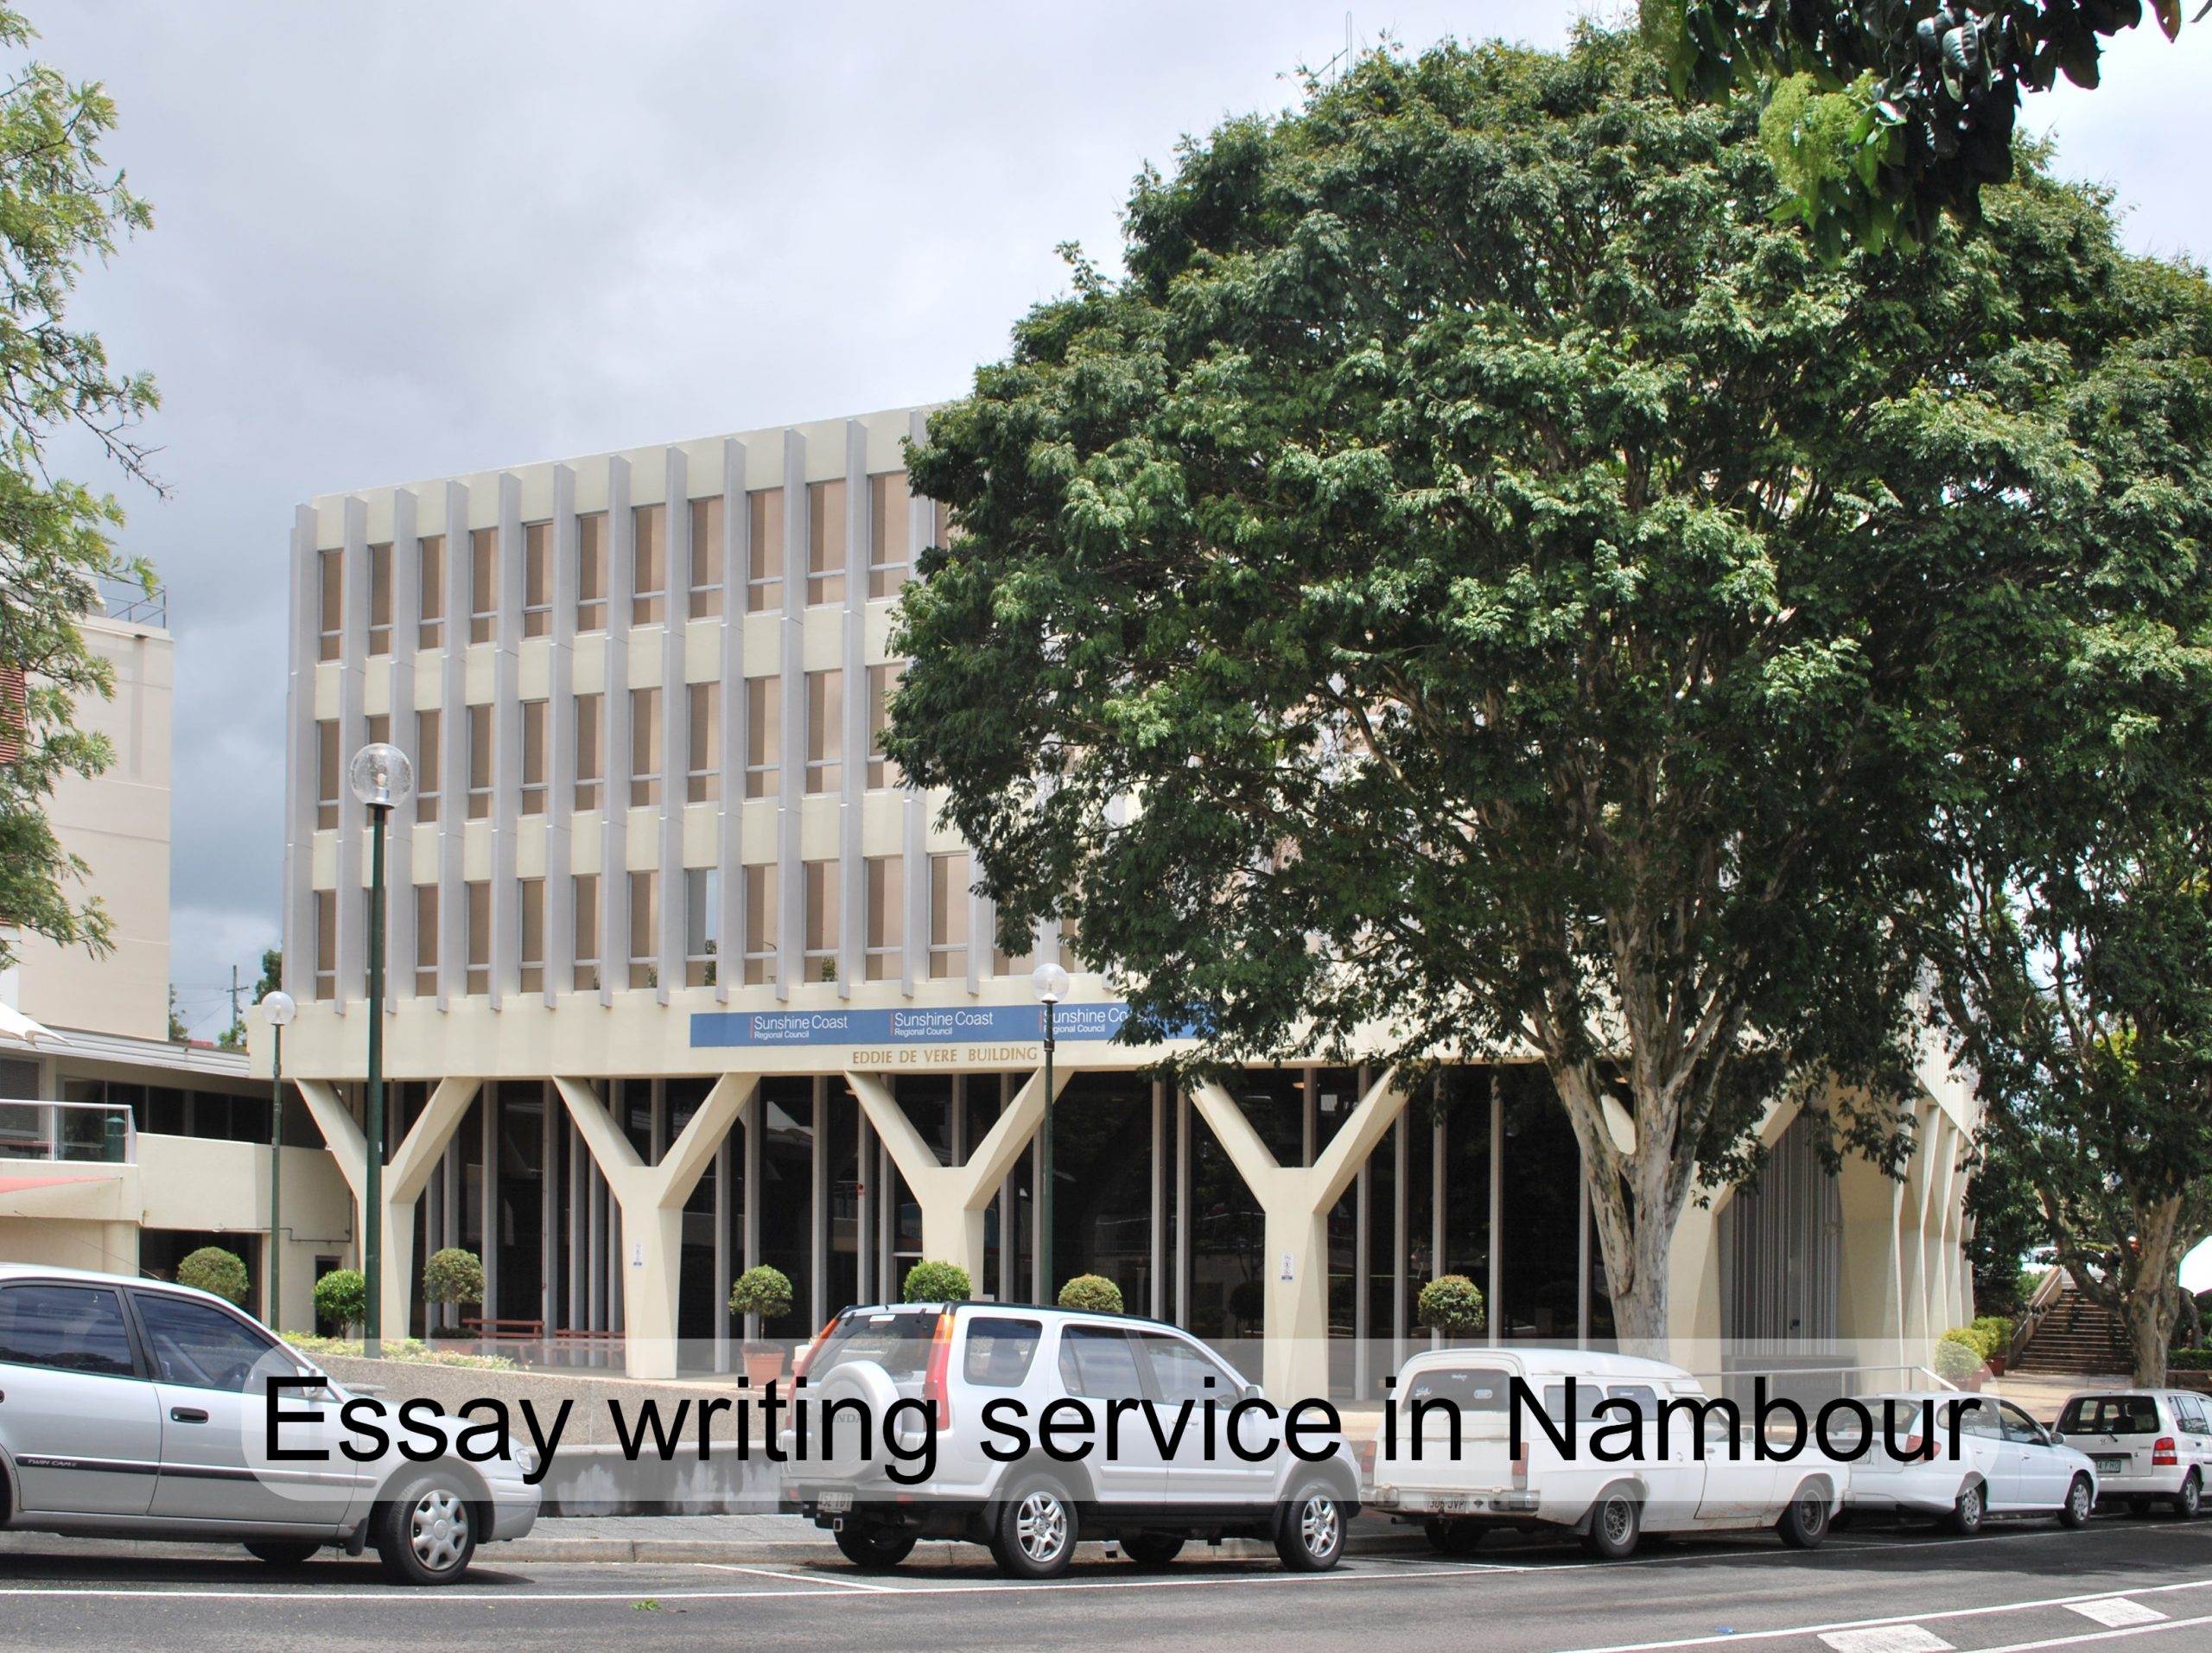 Essay writing service in Nambour